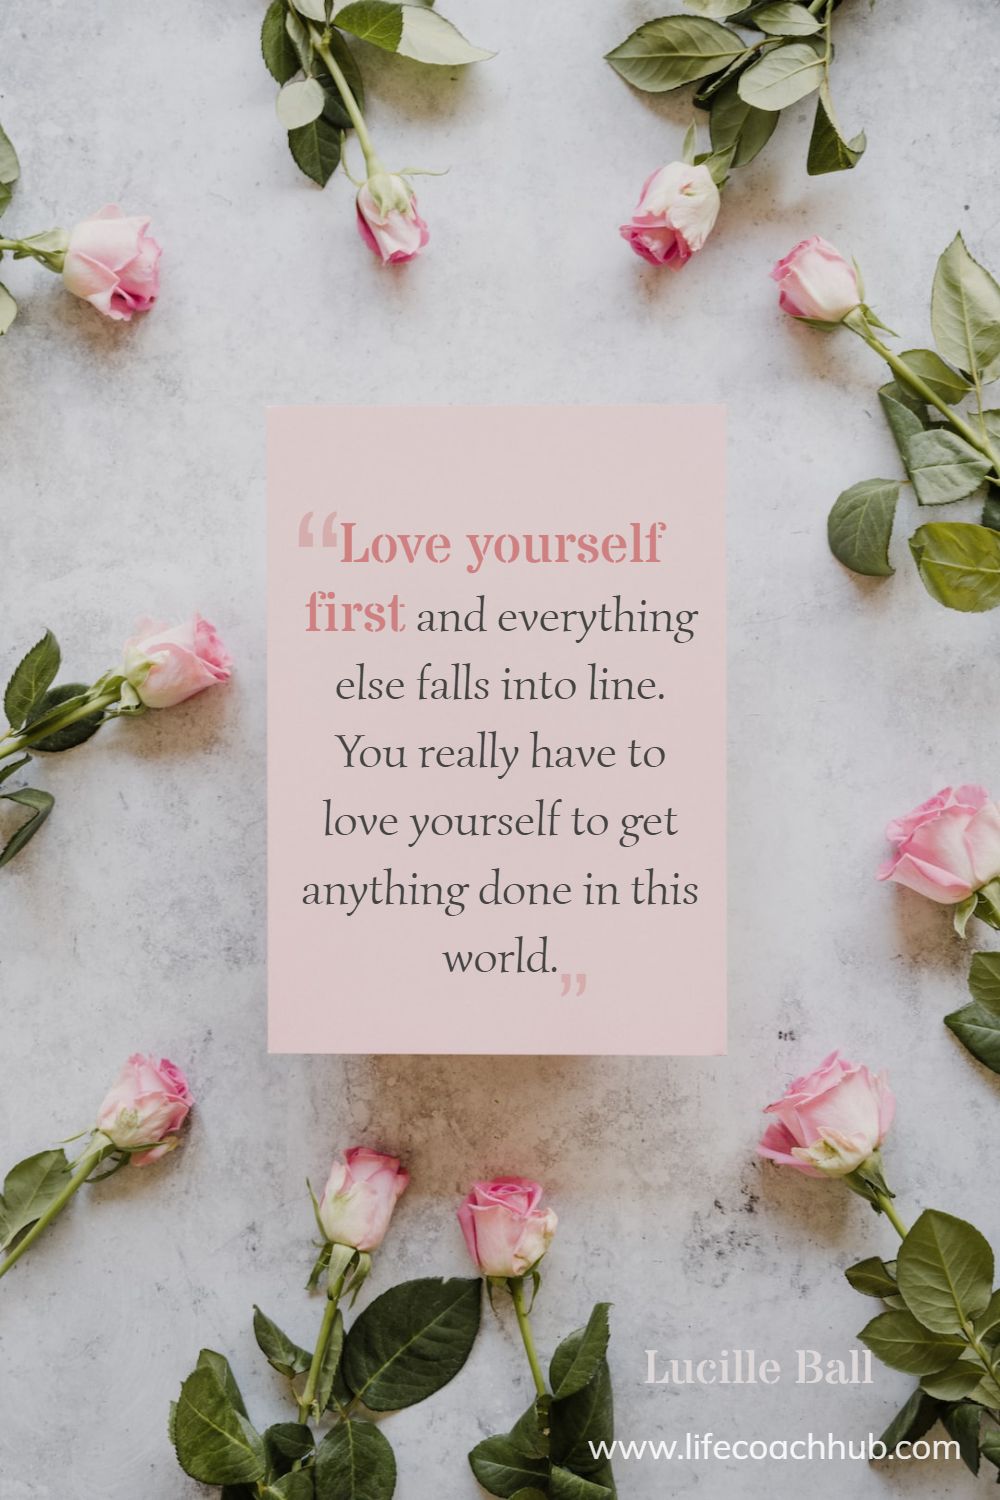 Love yourself first and everything else falls into line. You really have to love yourself to get anything done in this world. Lucille Ball Coaching Quote